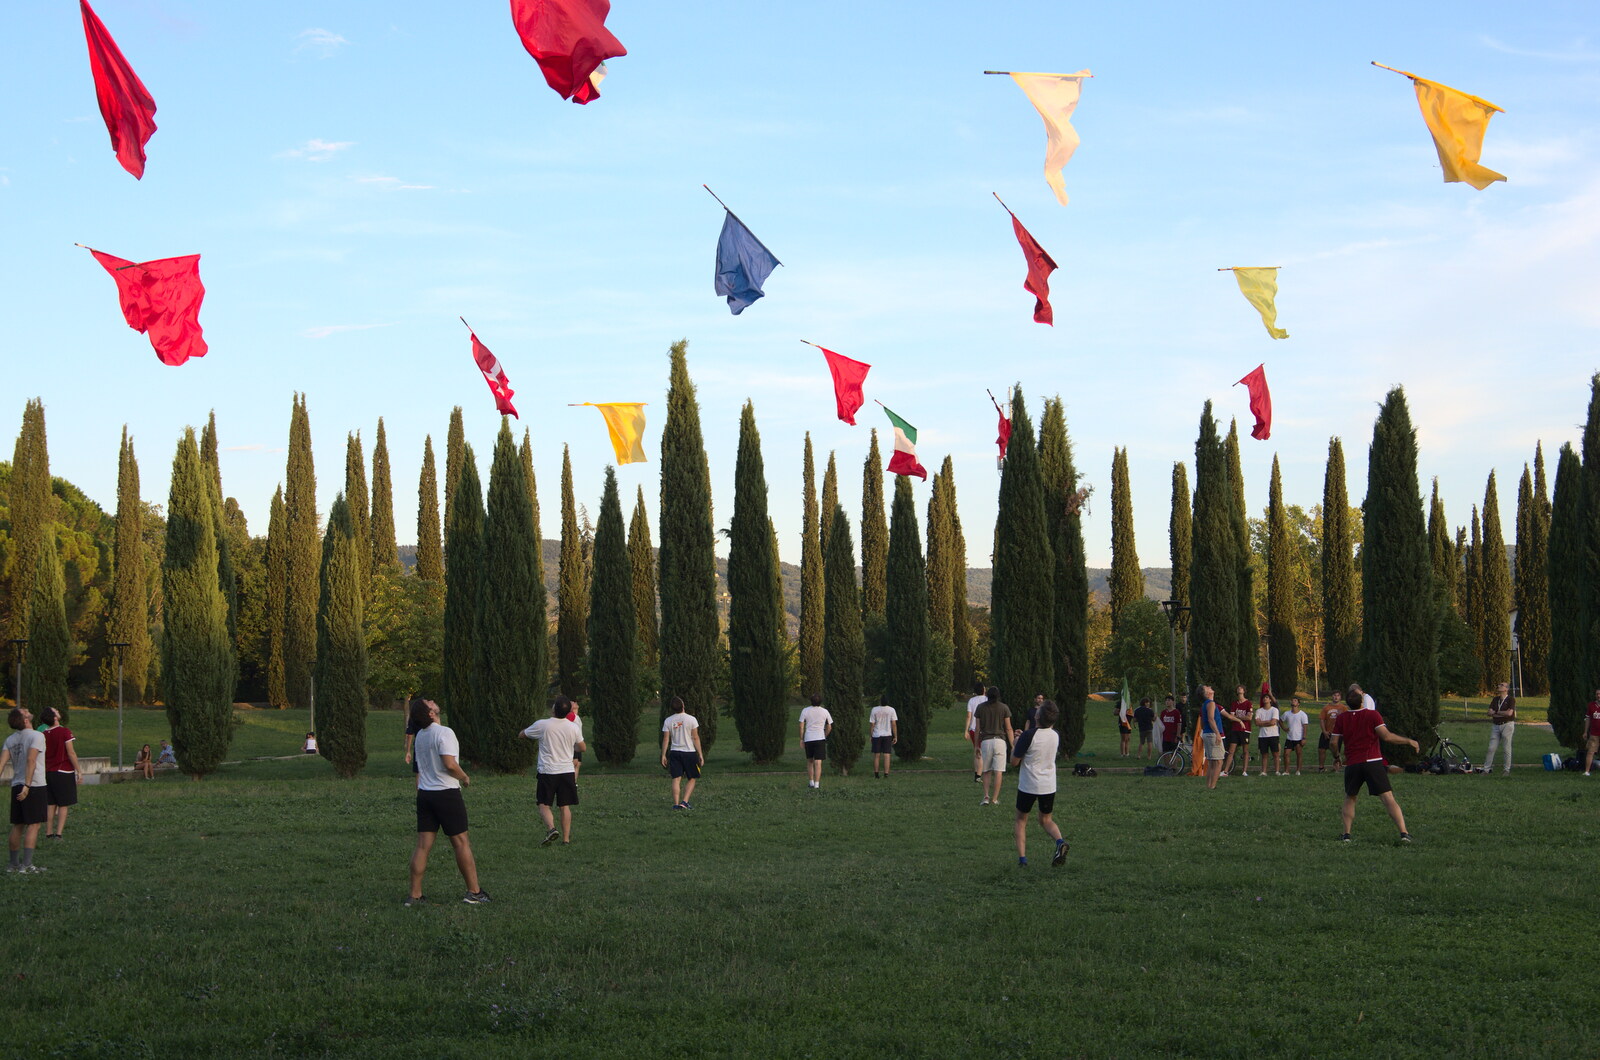 The Flags of Arezzo, Tuscany, Italy - 28th August 2022: Massed flag throwing